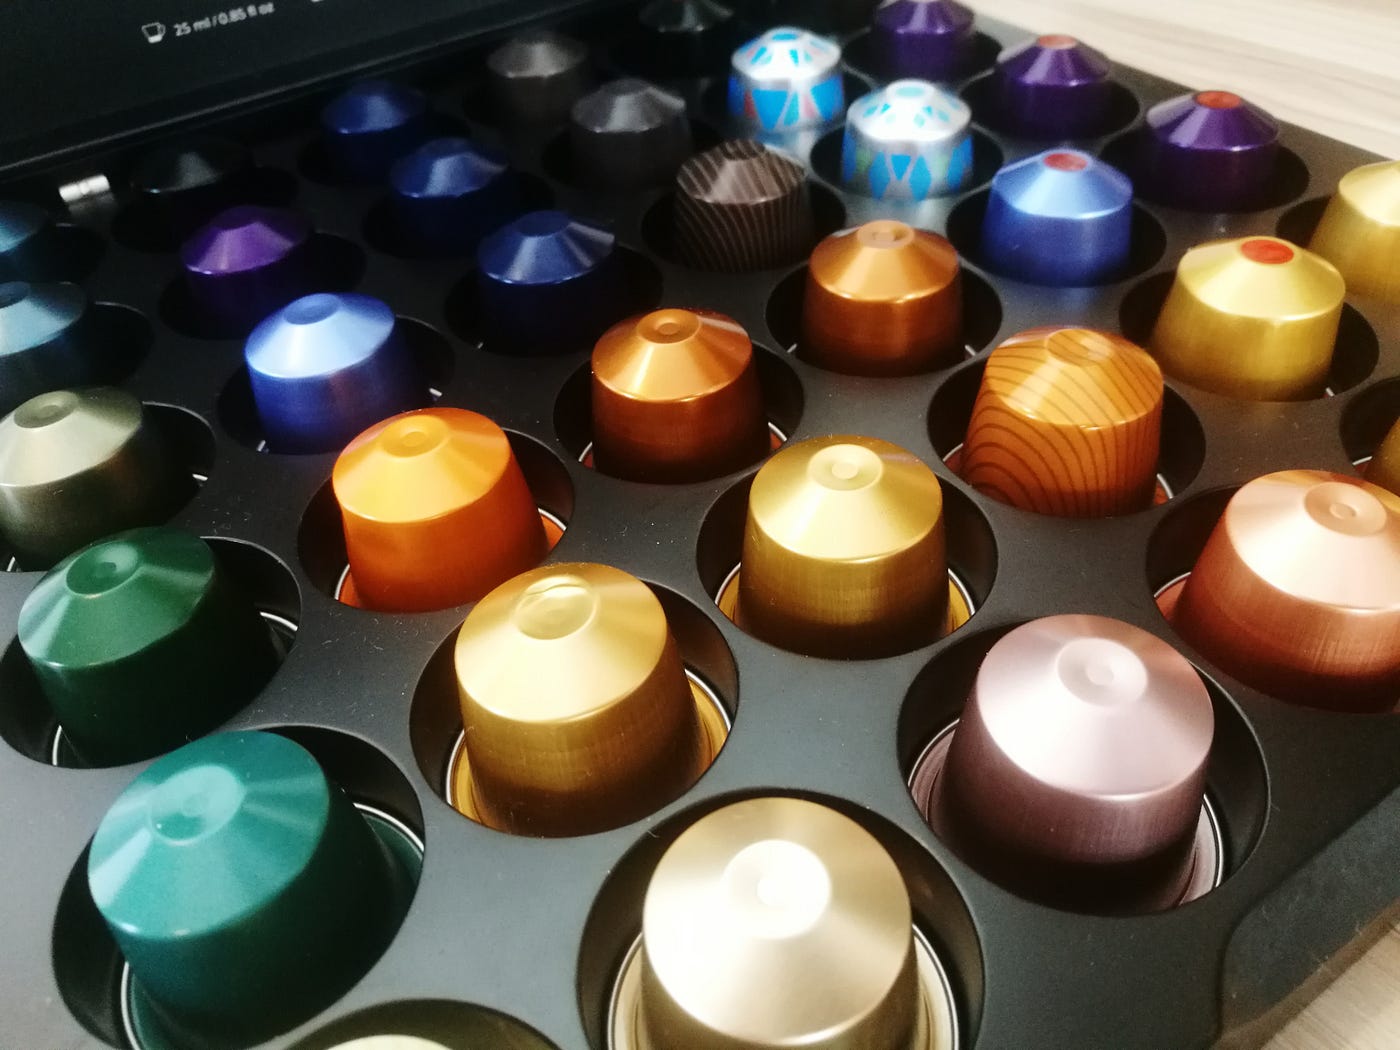 A guide to the best Nespresso capsules, by Gianluca Fiore